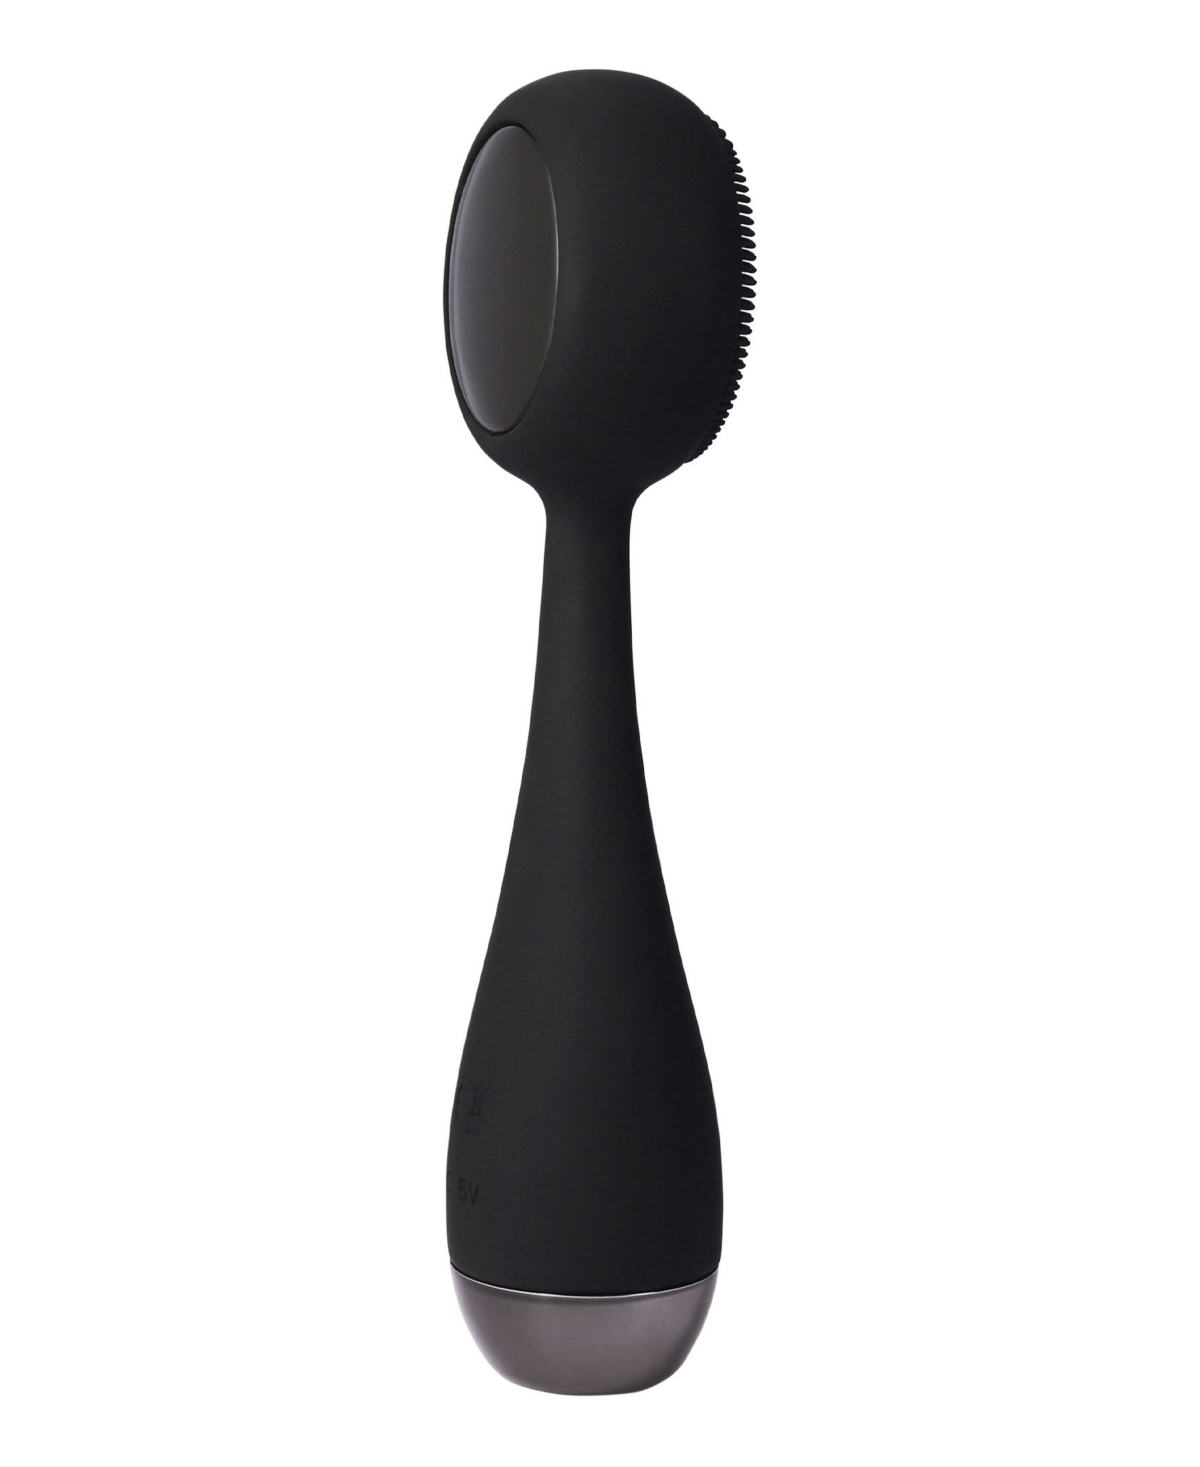 Clean Pro Ob Smart Facial Cleansing Device - Black